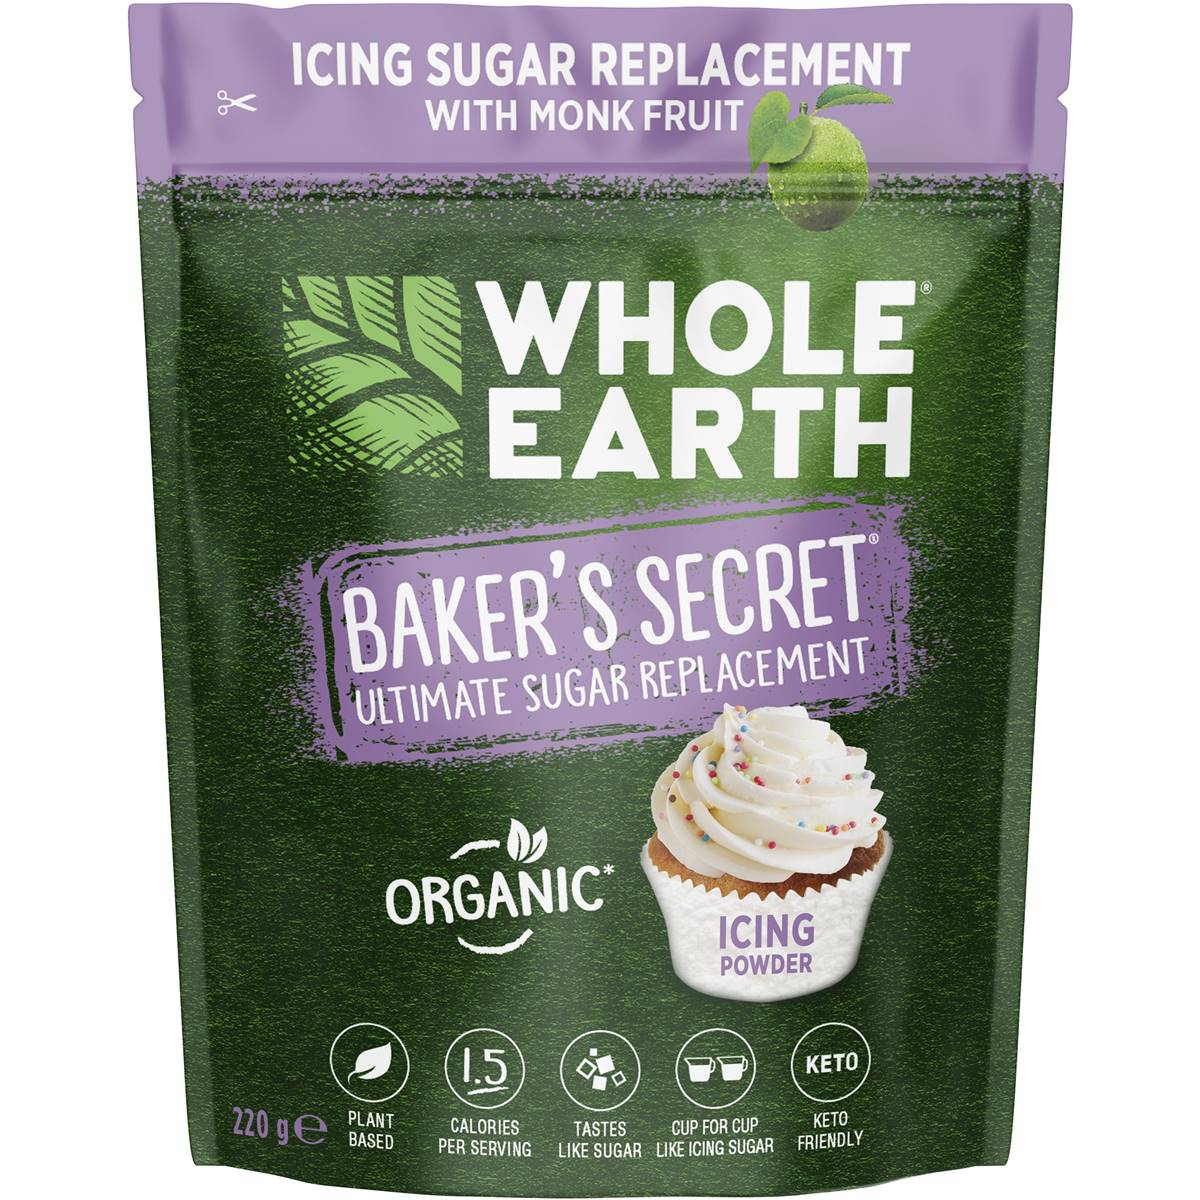 Calories in Whole Earth Icing Sugar Replacement